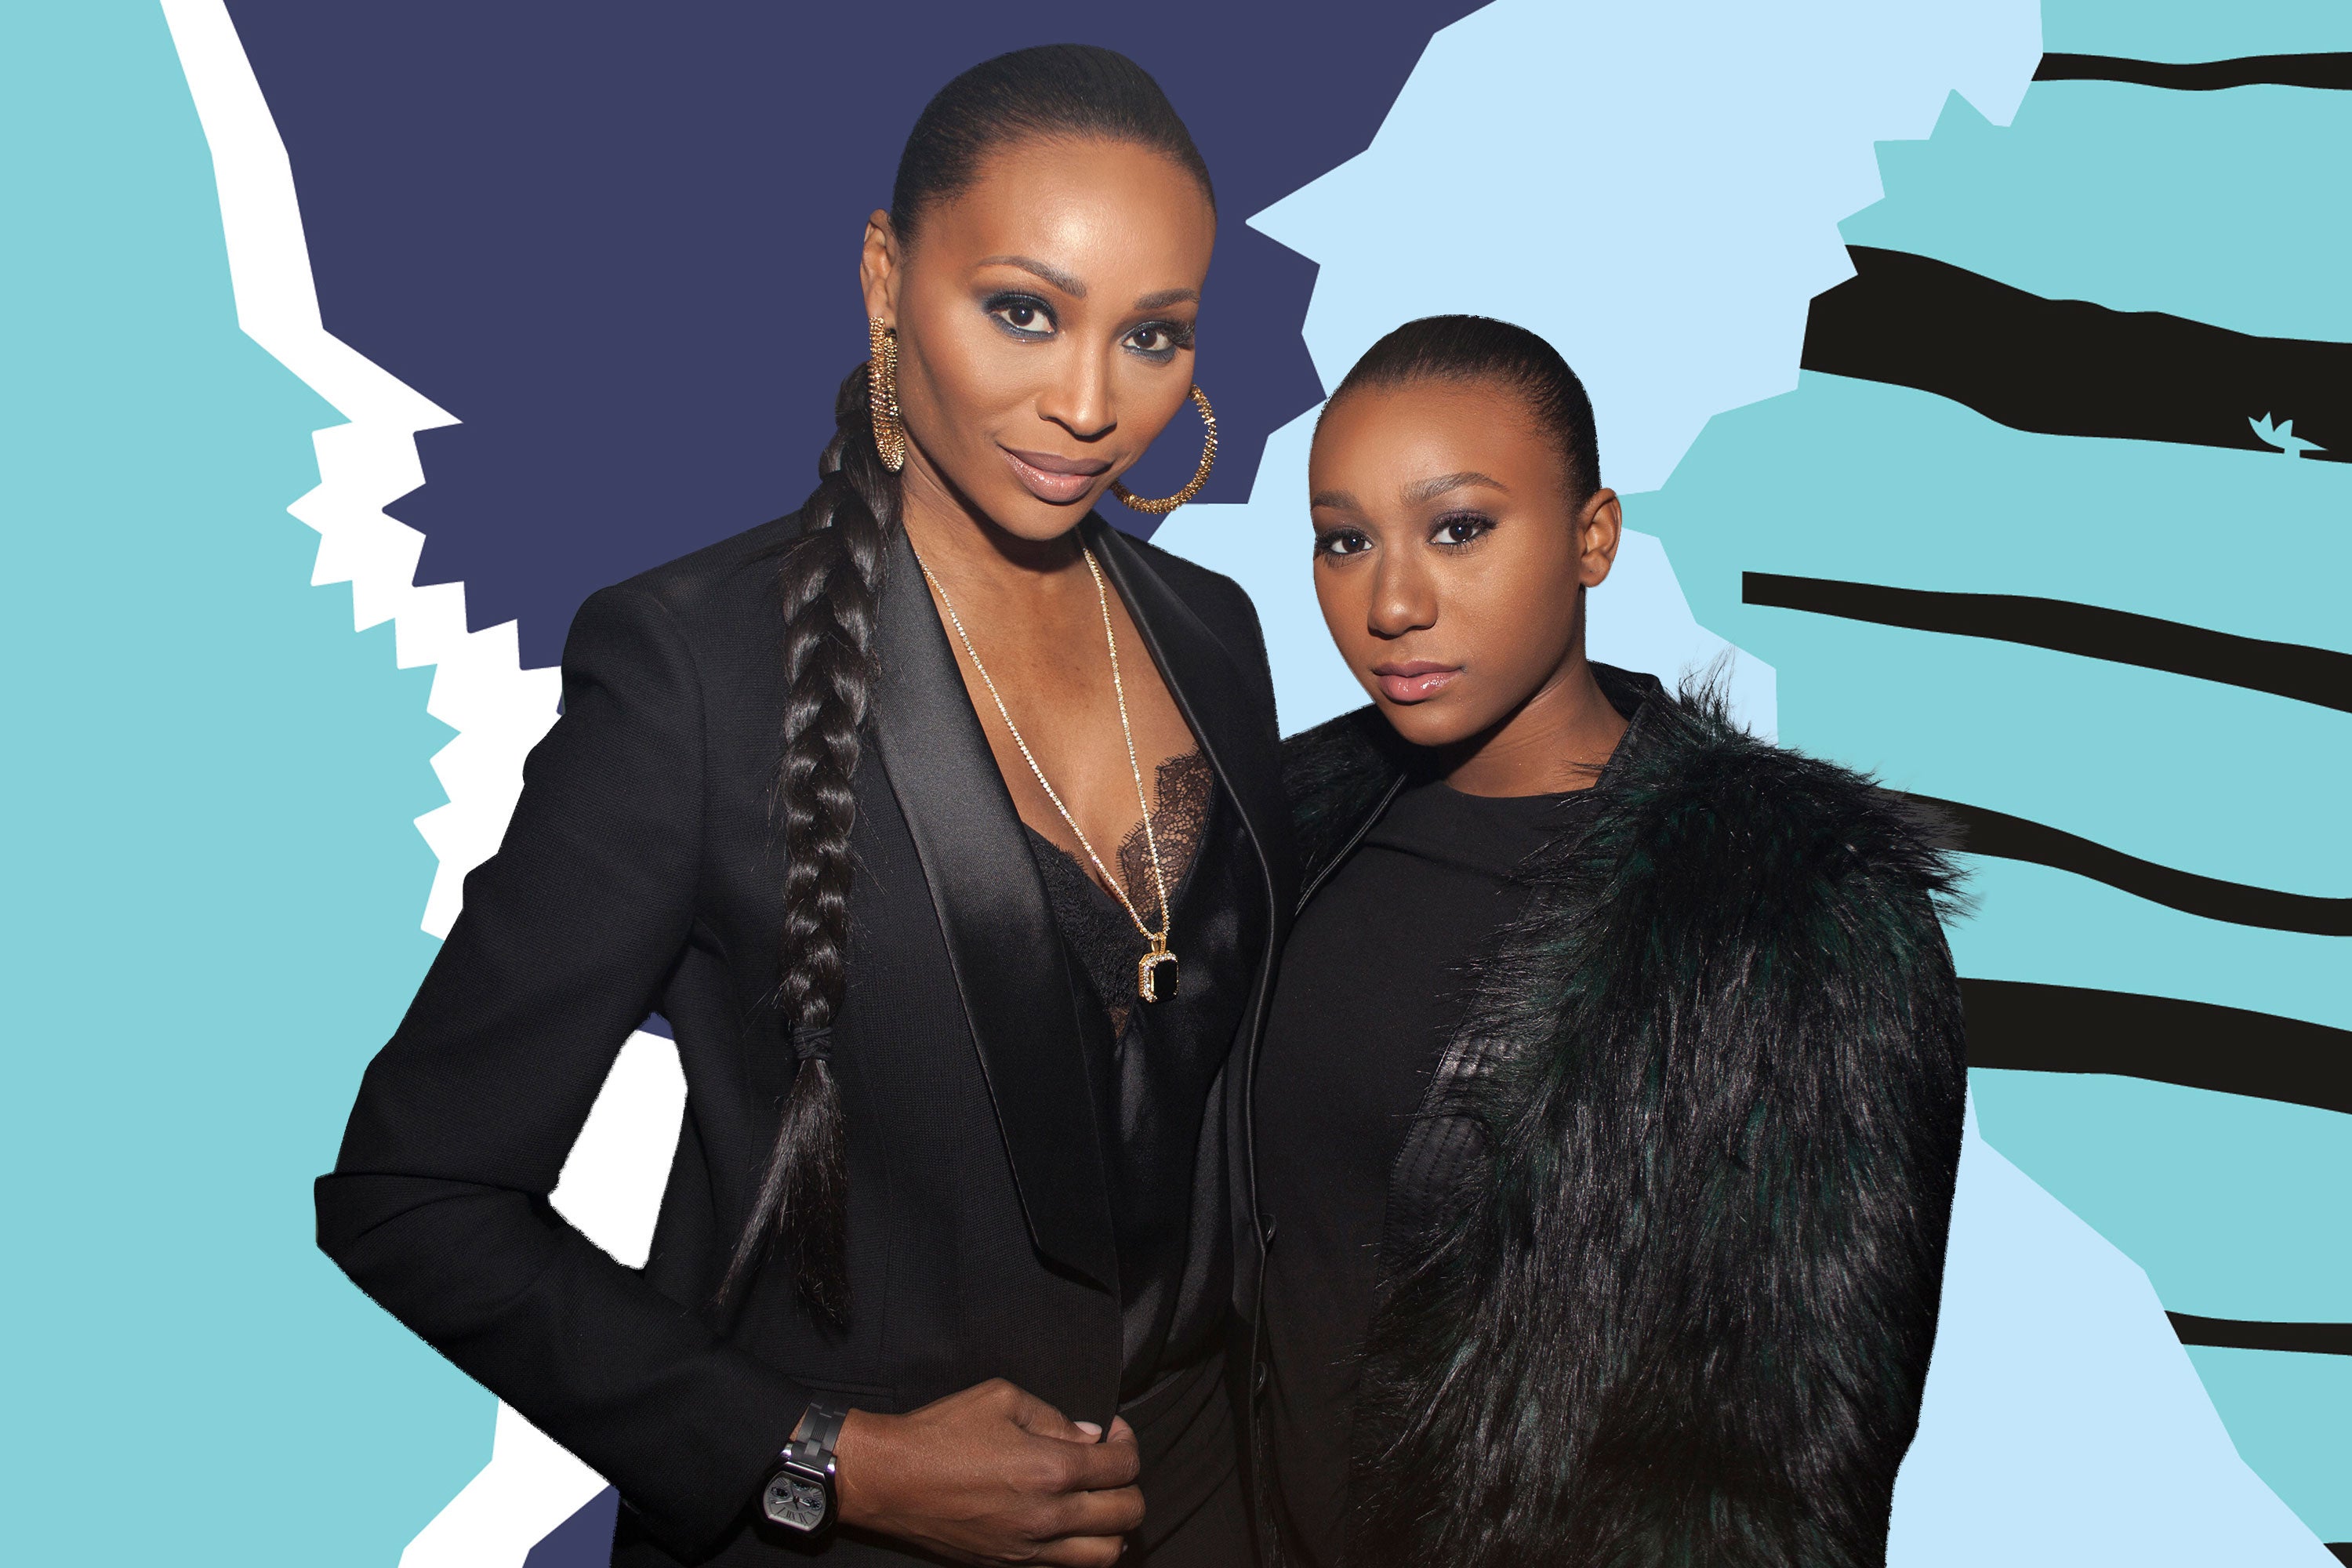 Cynthia Bailey's Daughter Noelle Is Her Twin In This Photo From NeNe Leakes' Birthday Party
